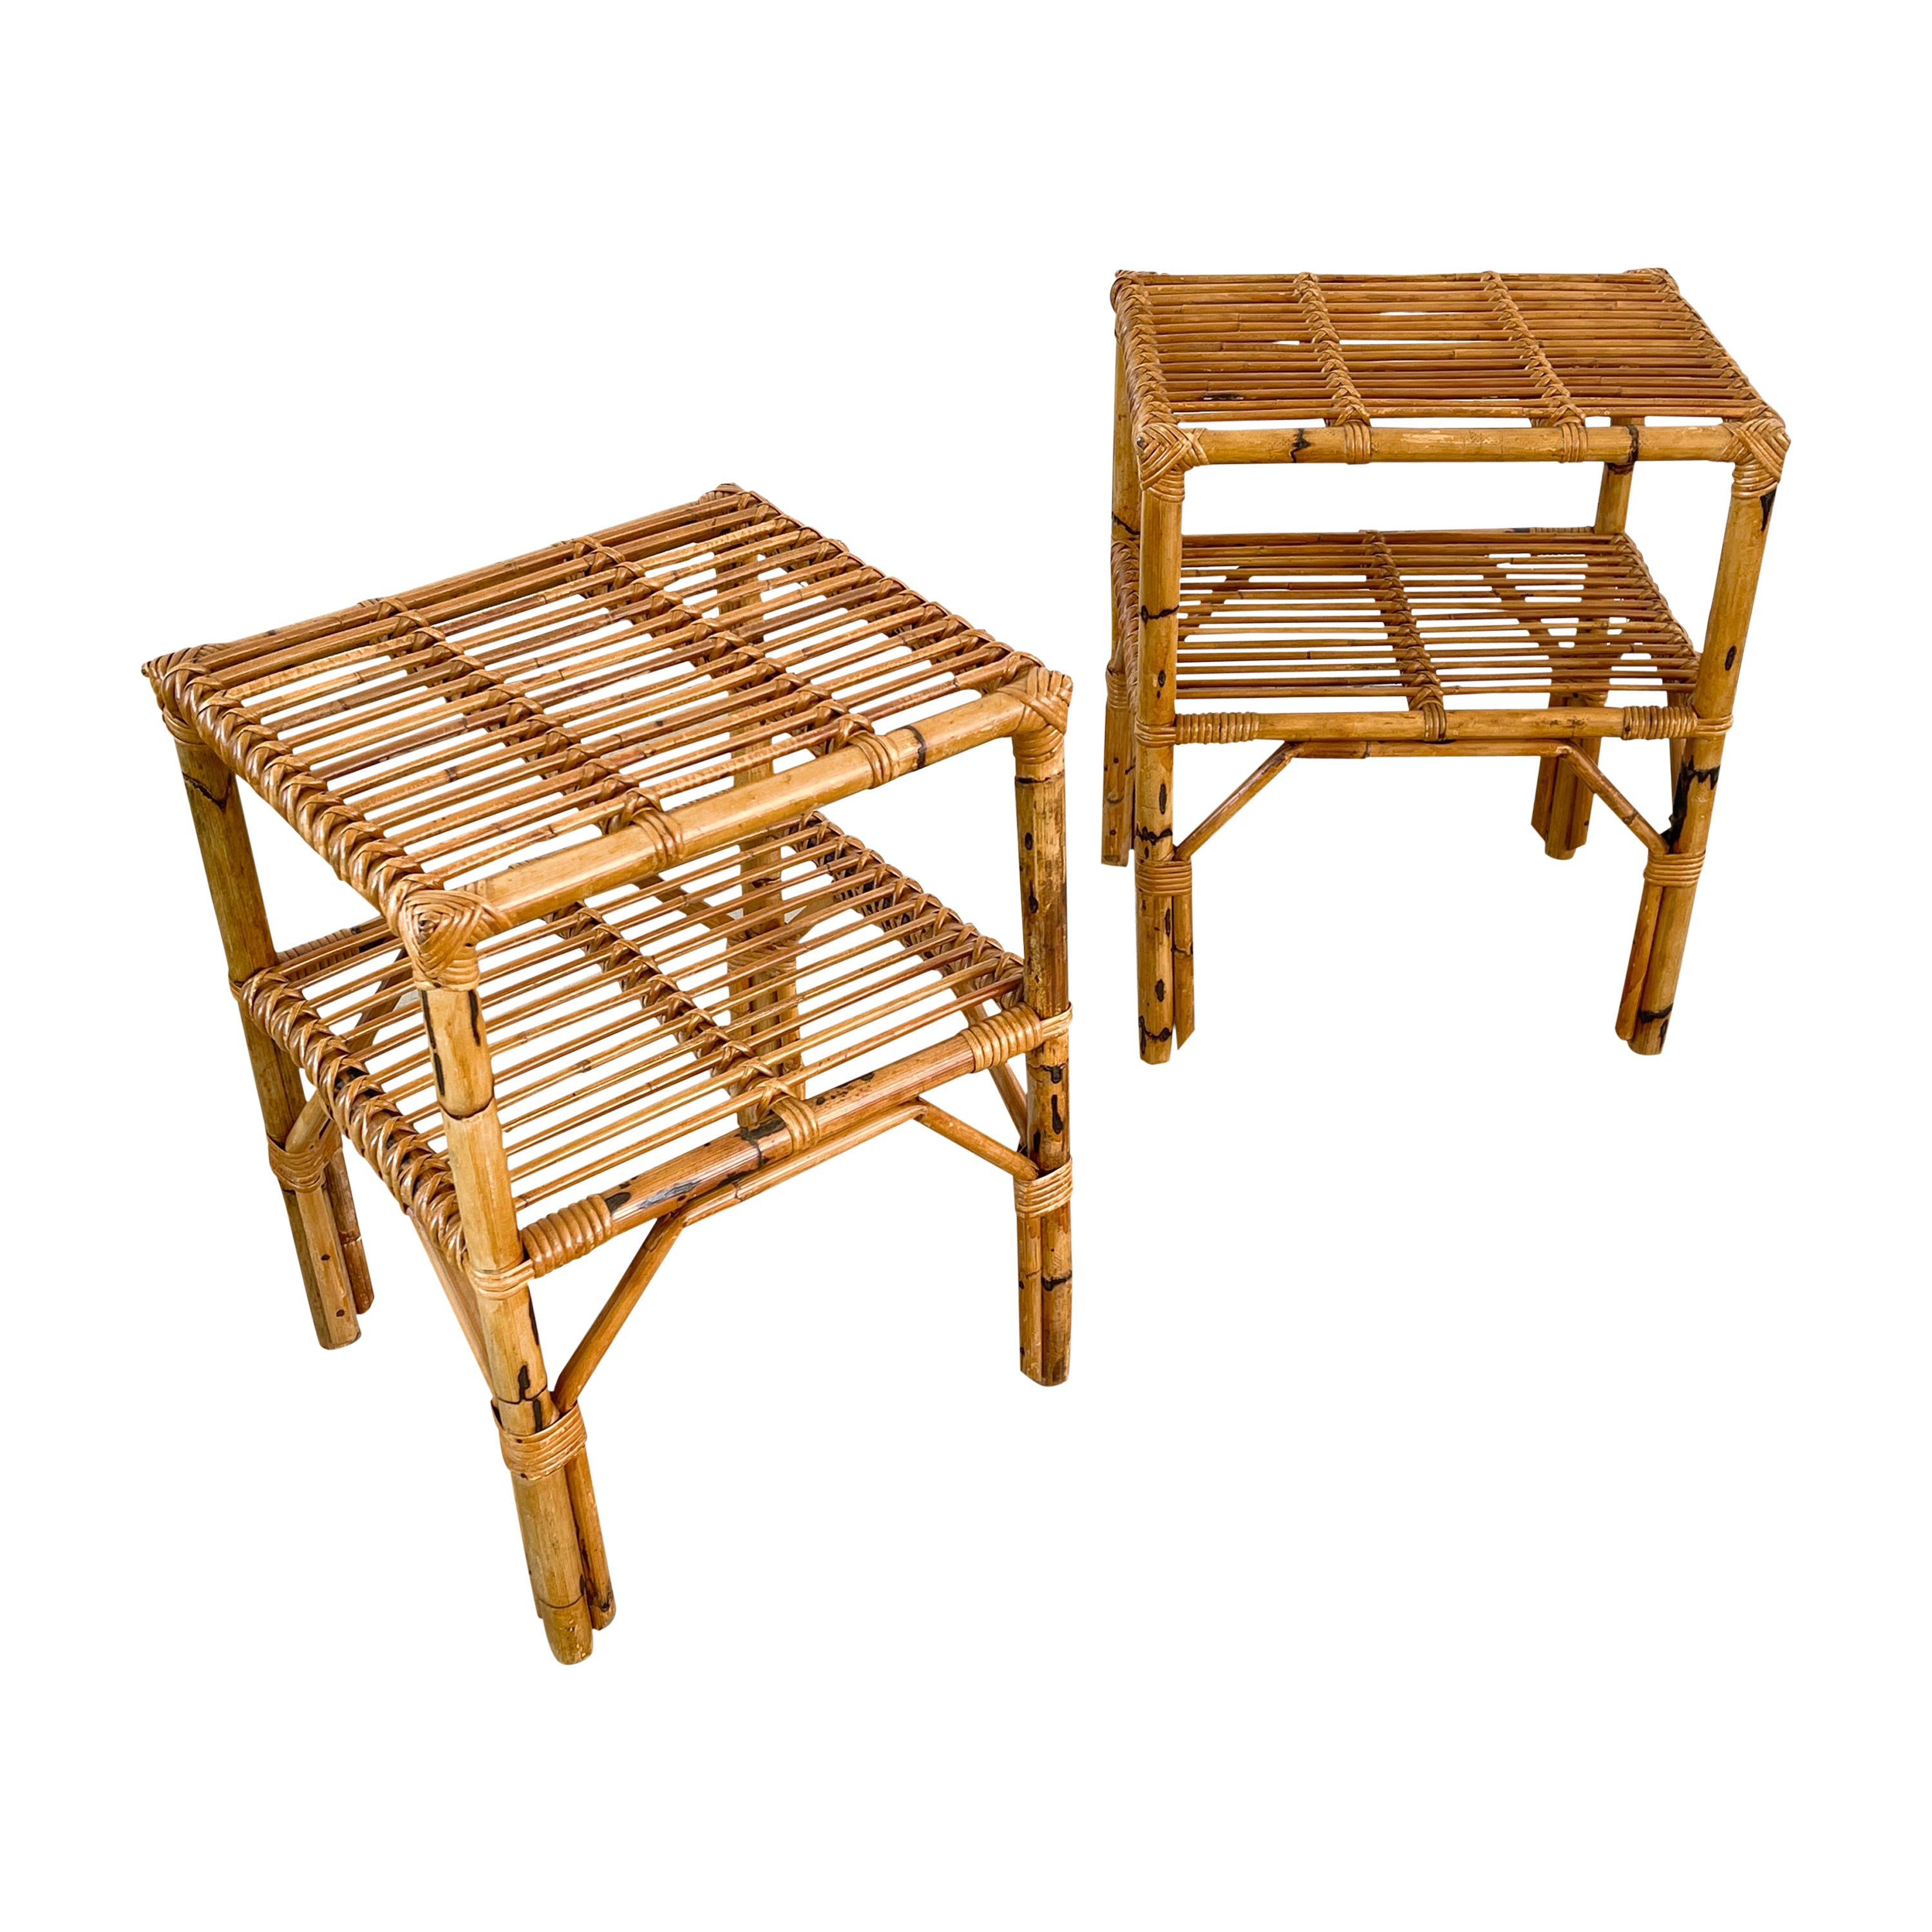 1950's Italian bamboo nightstands with shelf - 
Simple and functional design with wonderful patina.